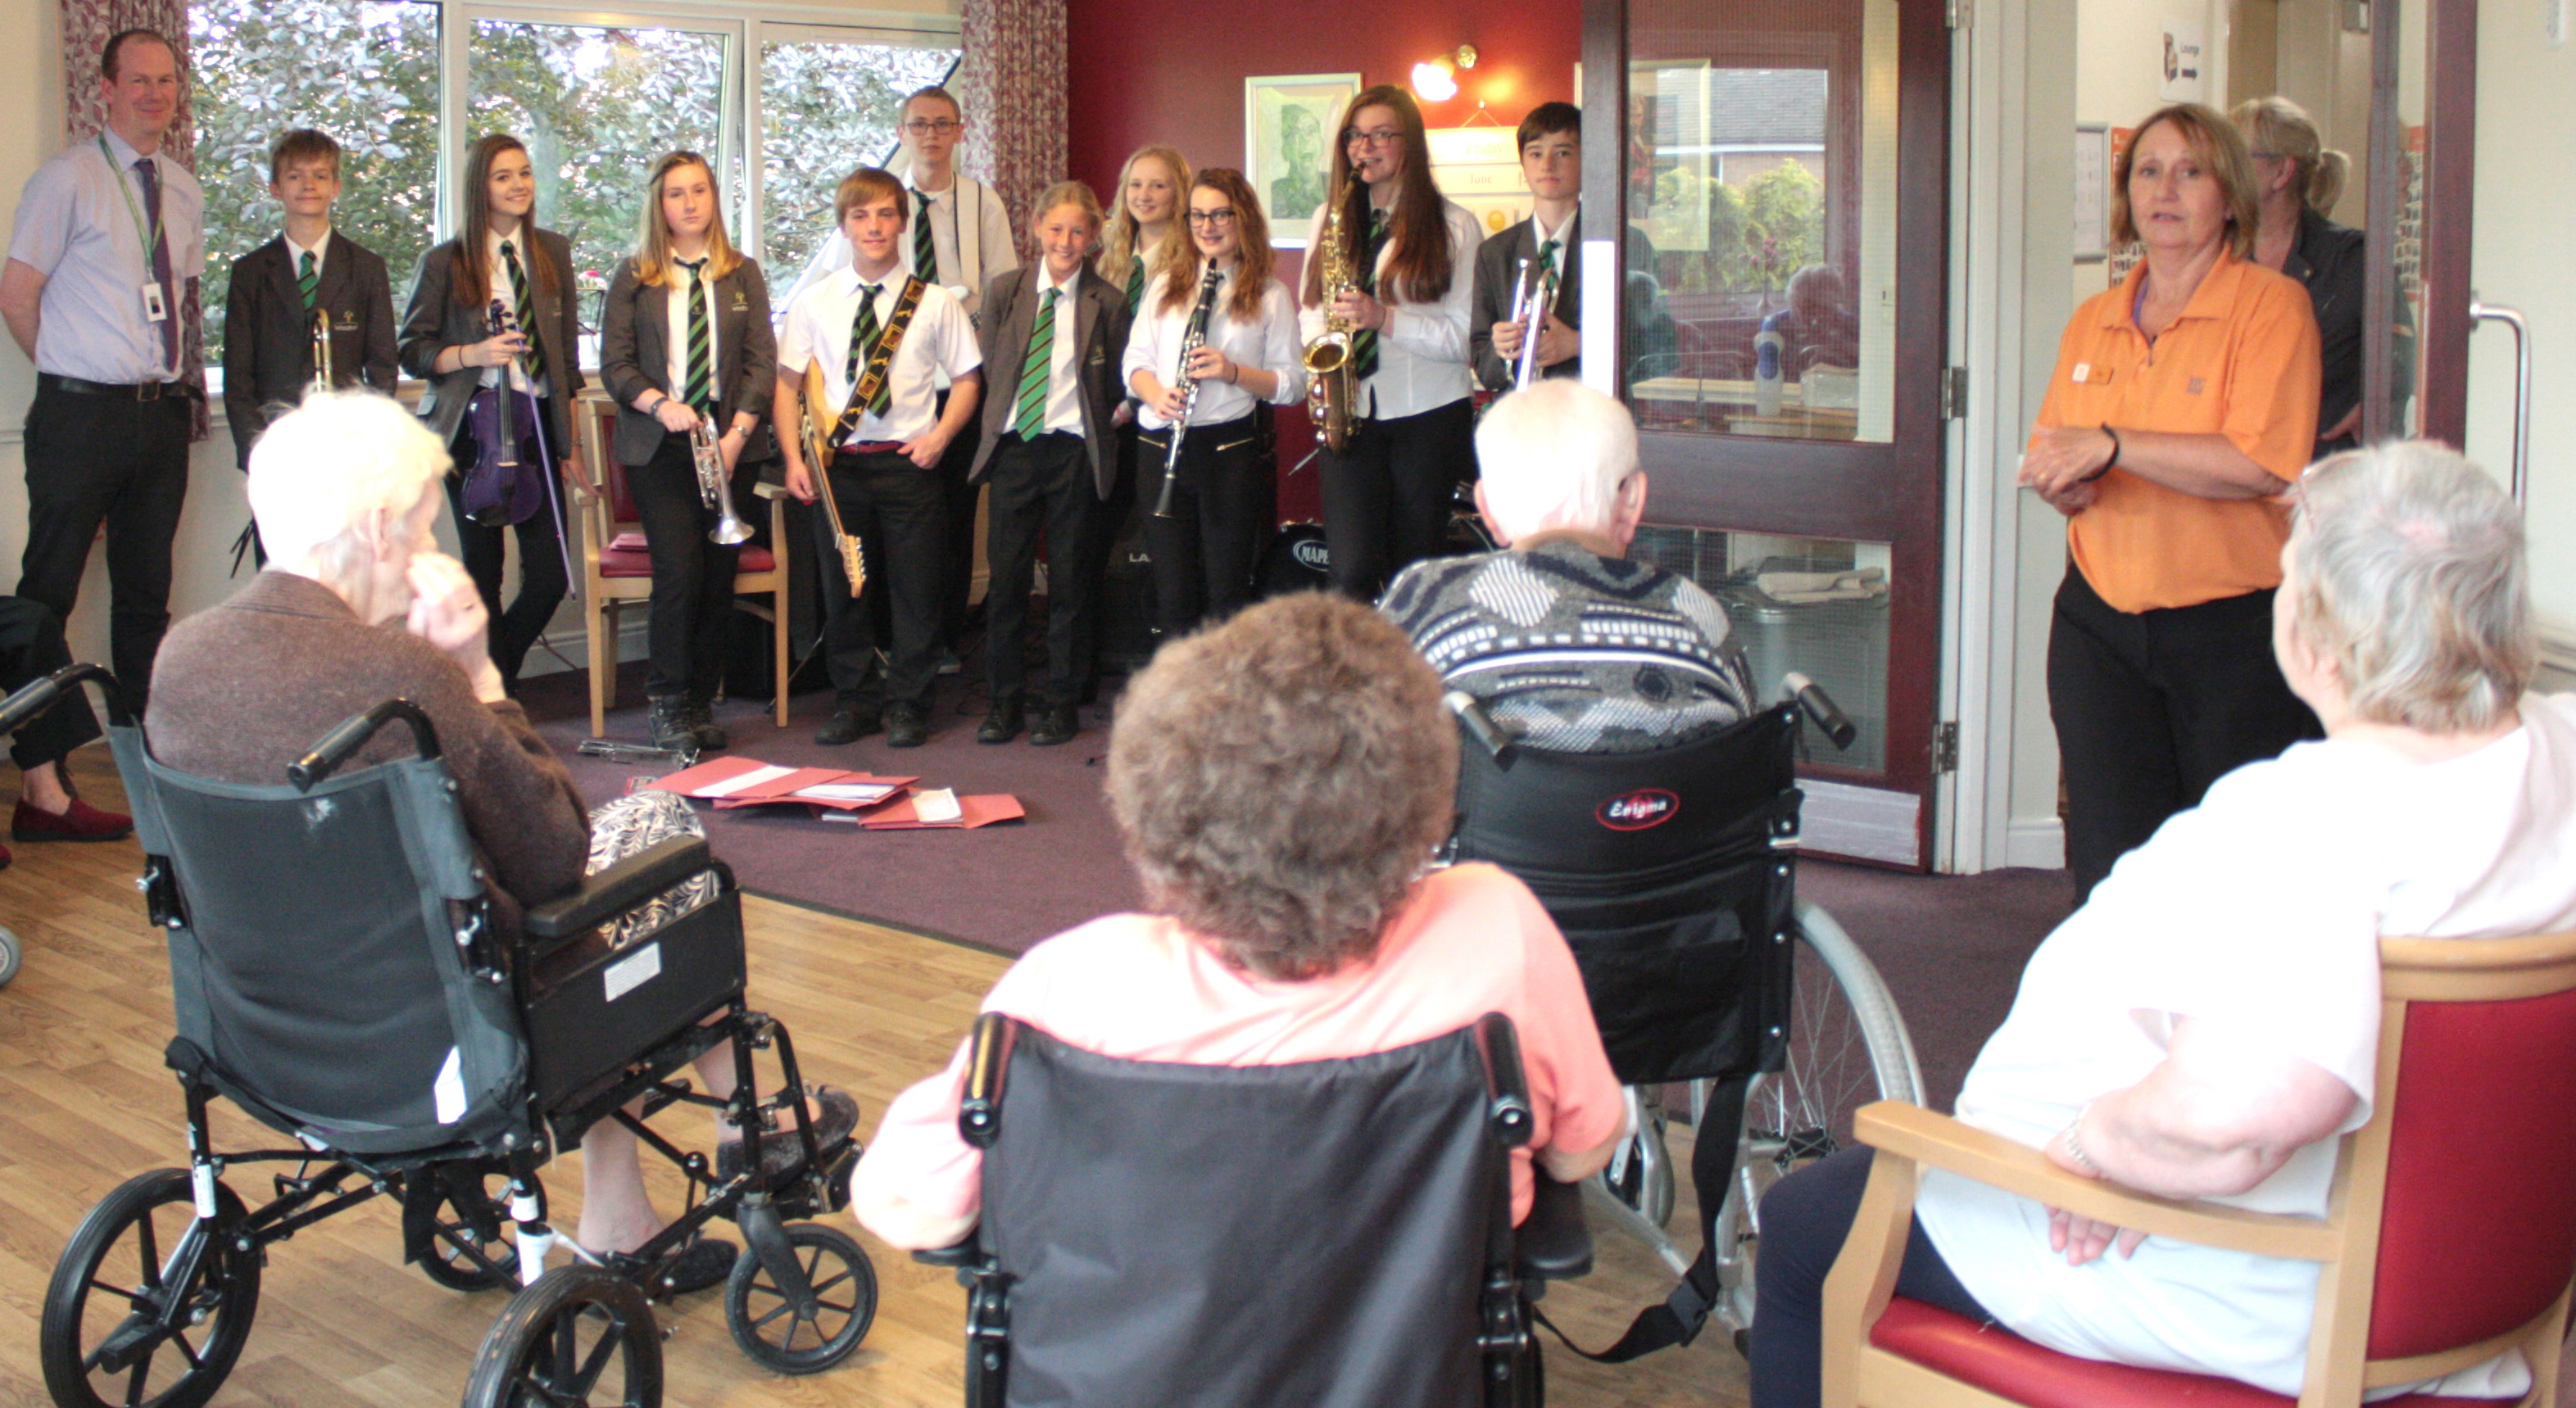 School Band Play at Defoe Court Open Day